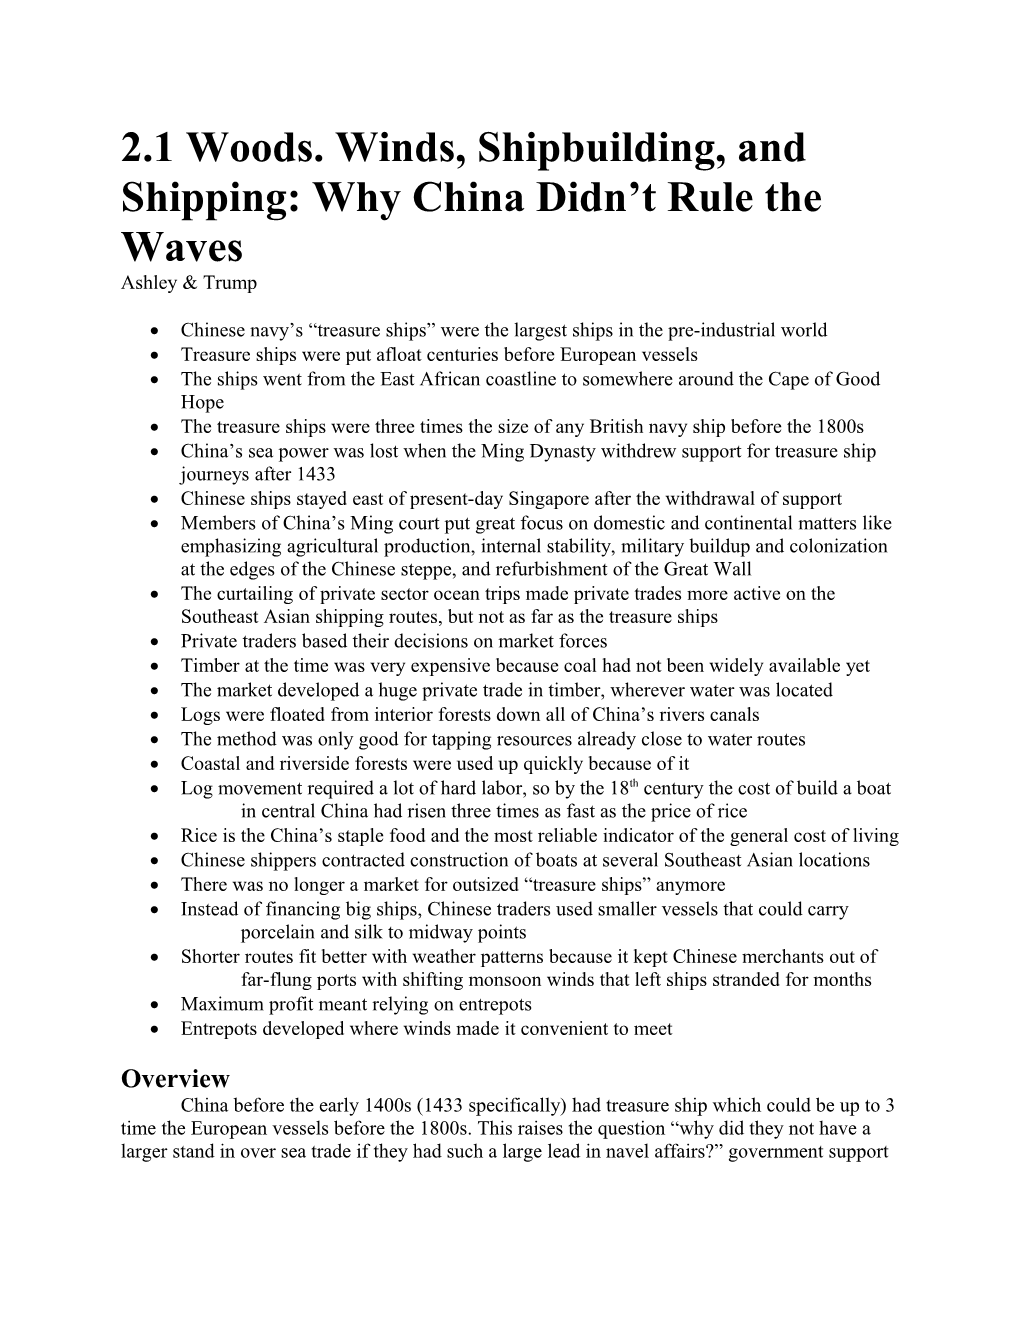 2.1 Woods. Winds, Shipbuilding, and Shipping: Why China Didn T Rule the Waves